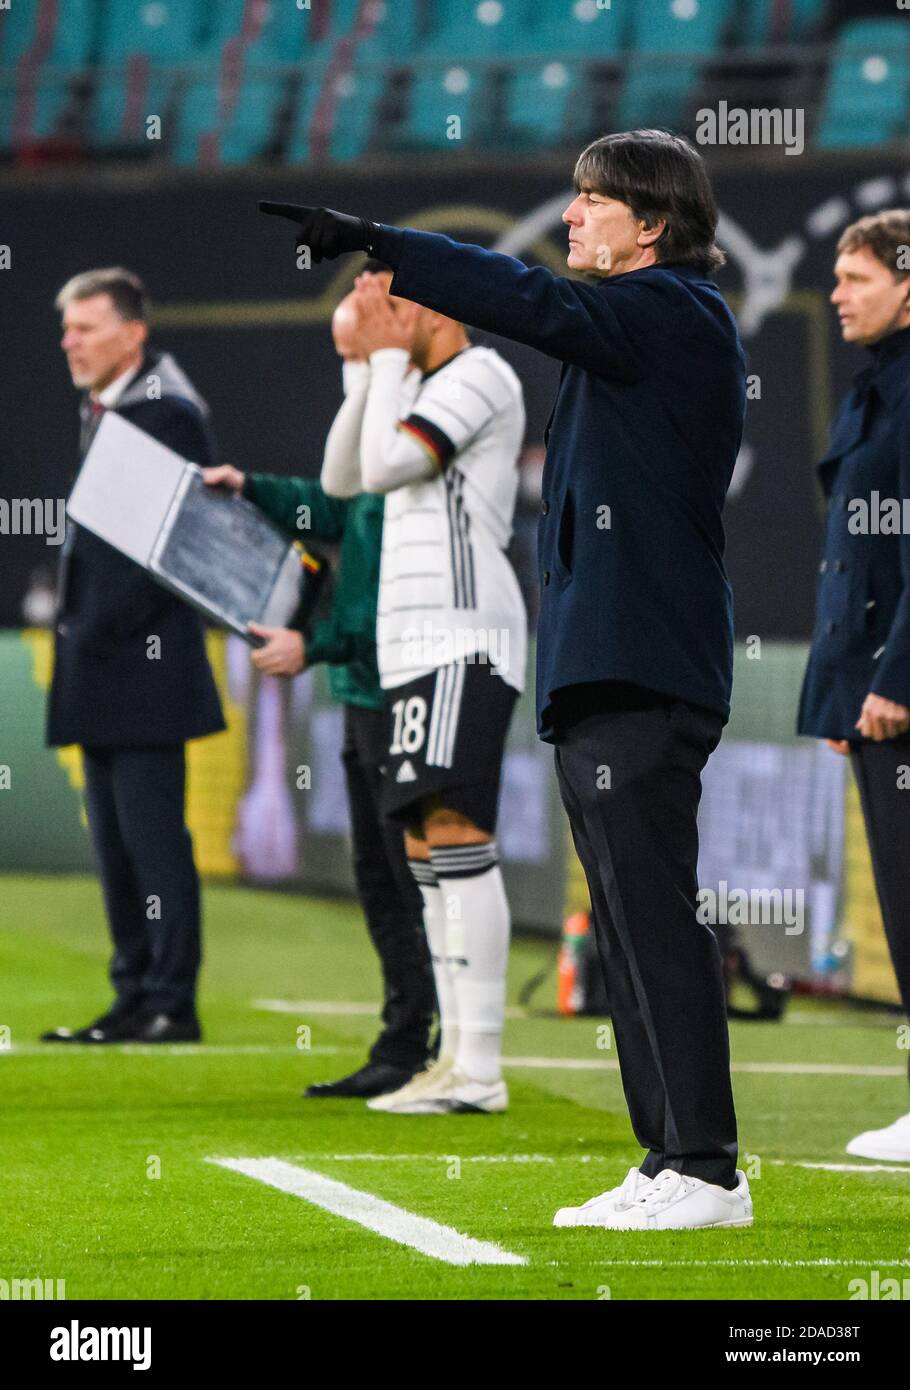 Leipzig, Germany. 11th Nov, 2020. Germany's head coach Joachim Loew (front) gestures during a friendly football match between Germany and the Czech Republic in Leipzig, Germany, Nov. 11, 2020. Credit: Kevin Voigt/Xinhua/Alamy Live News Stock Photo